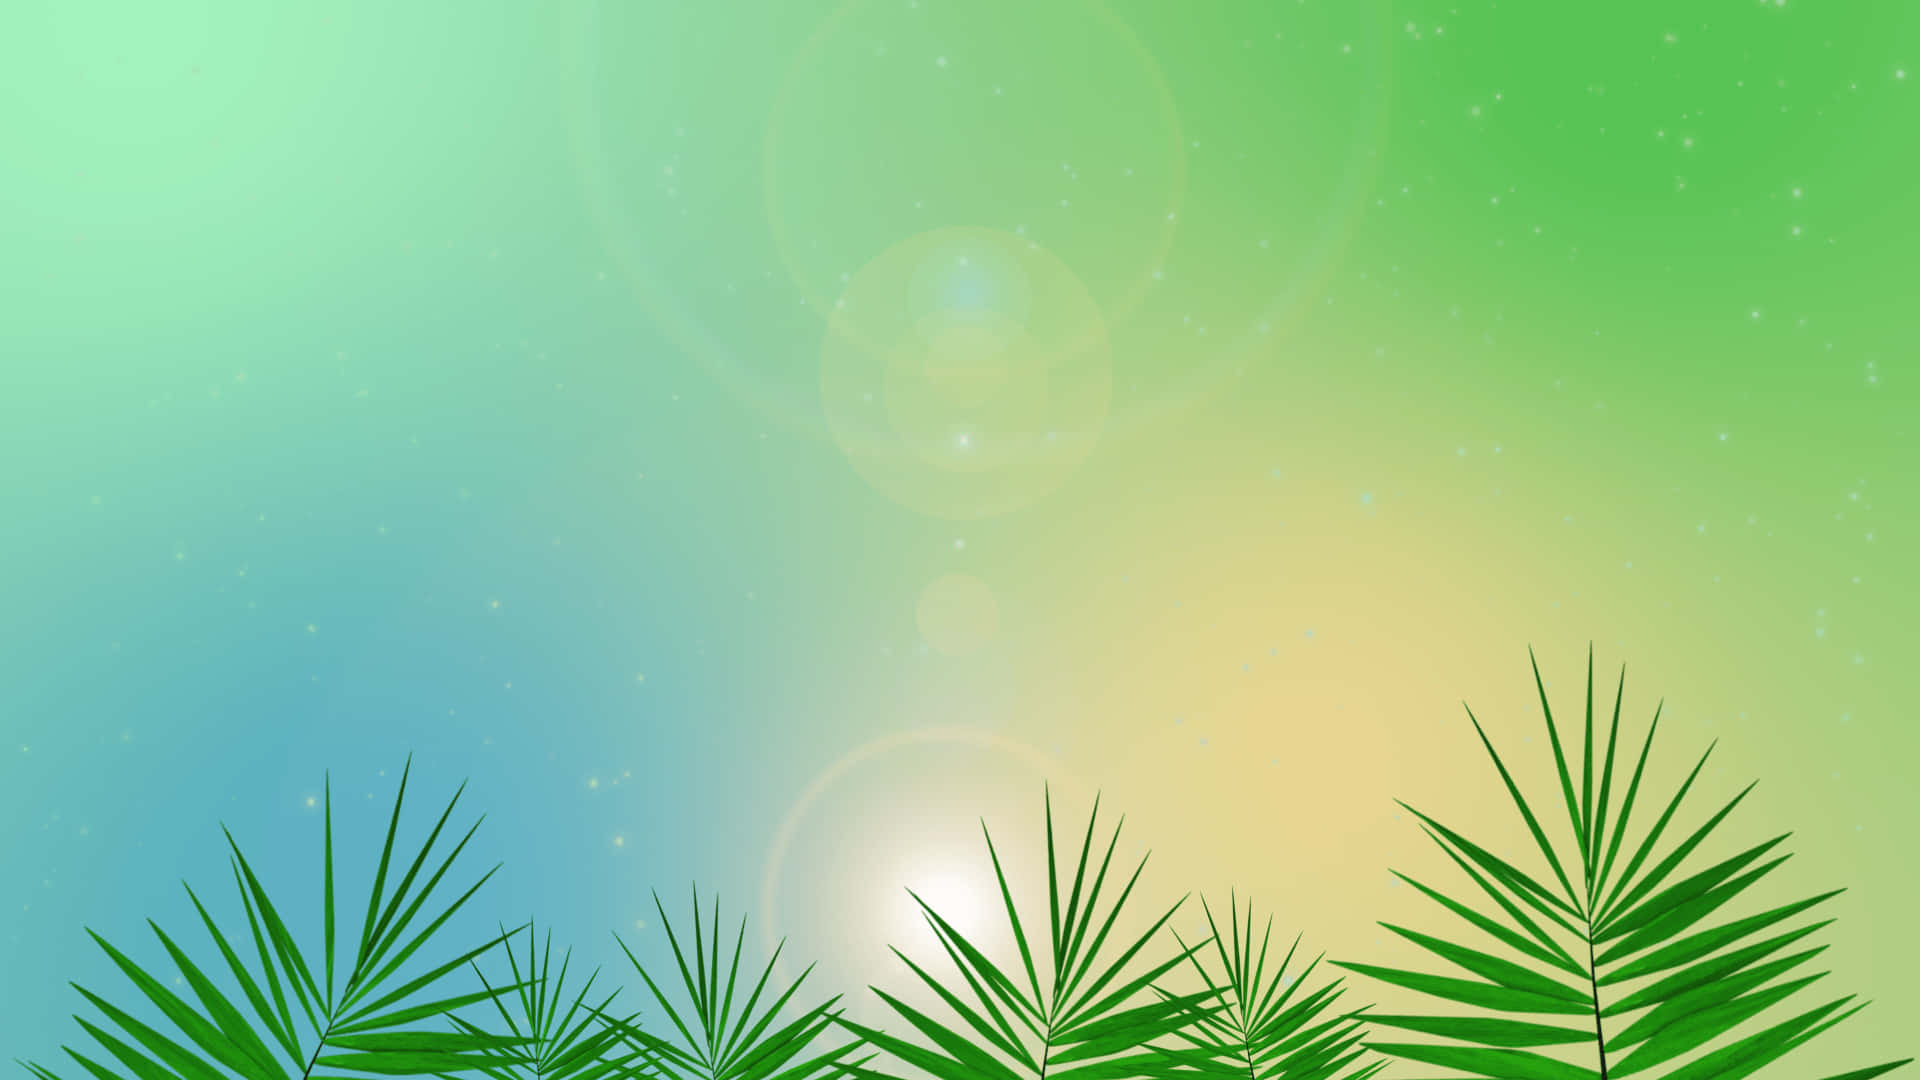 Download Ravishing Palm Picture For Palm Sunday Background | Wallpapers.com